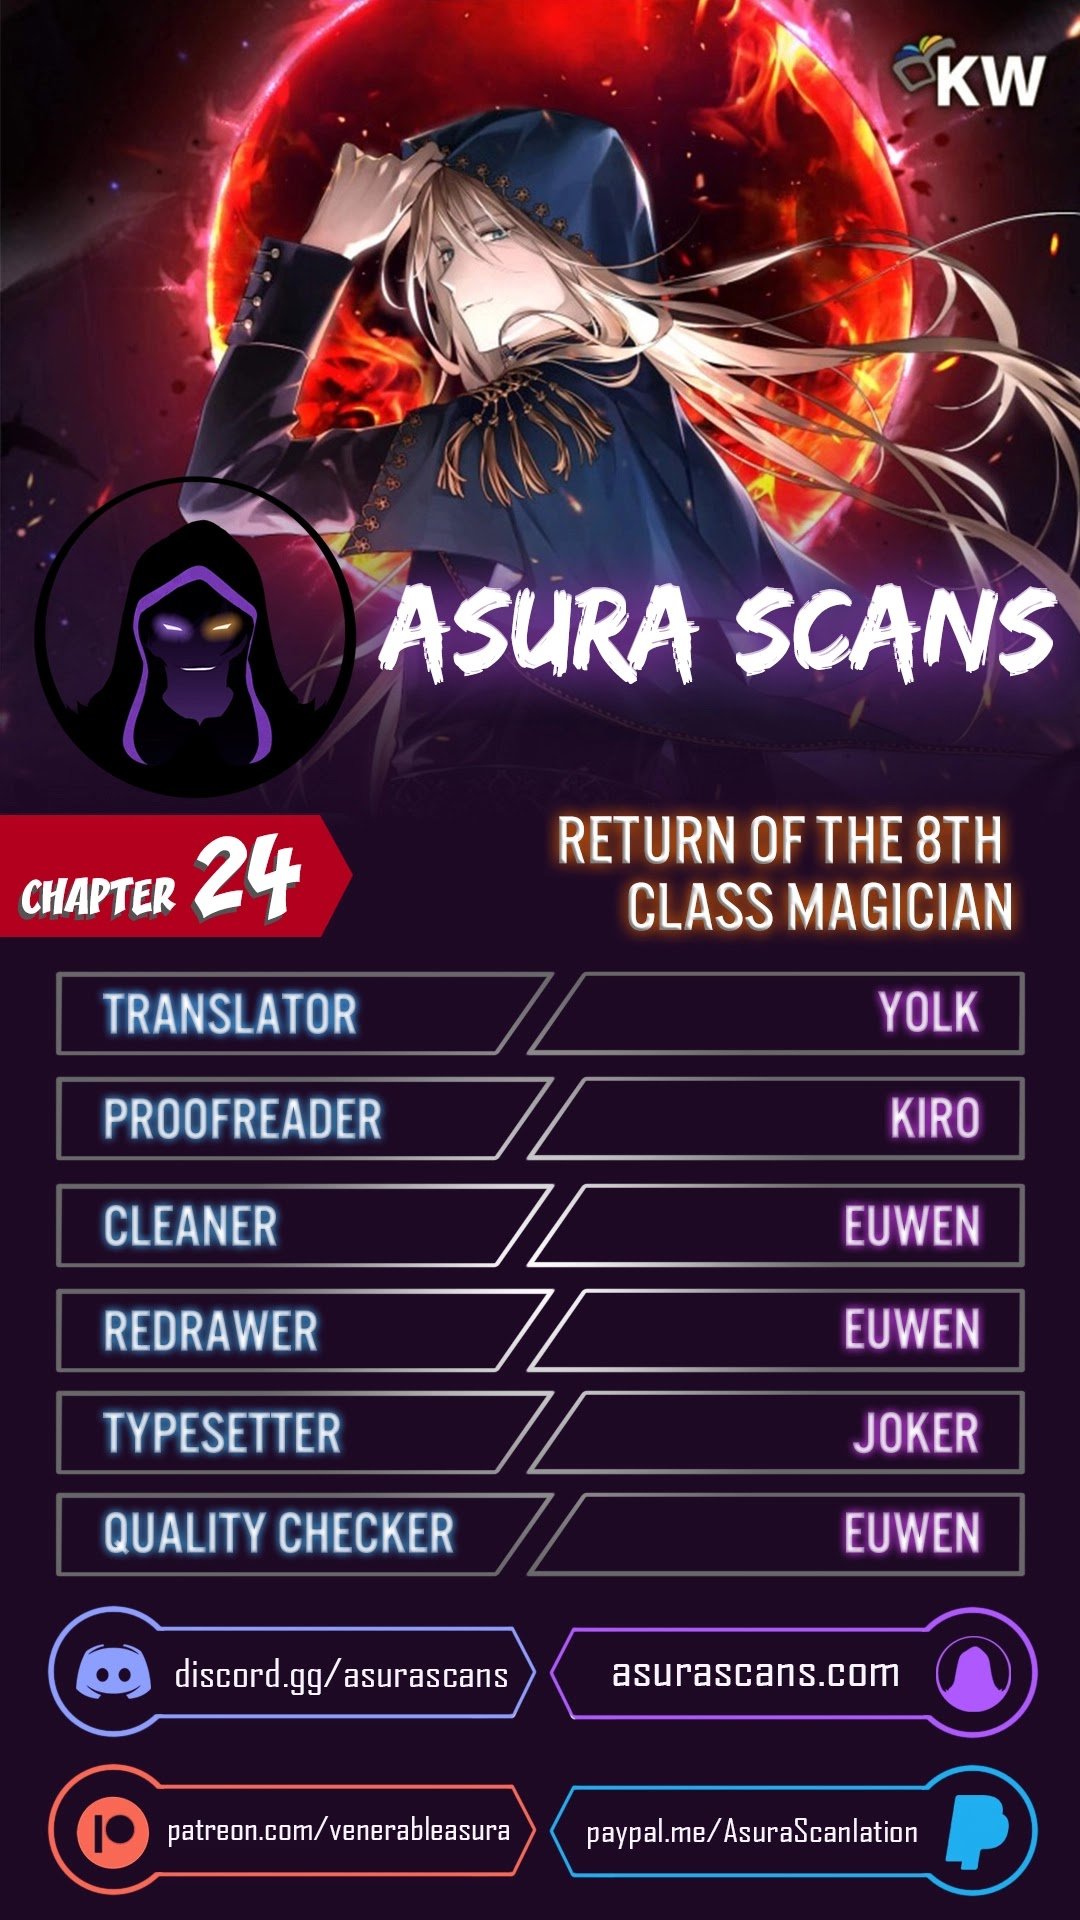 Return of the 8th class Magician chapter 24